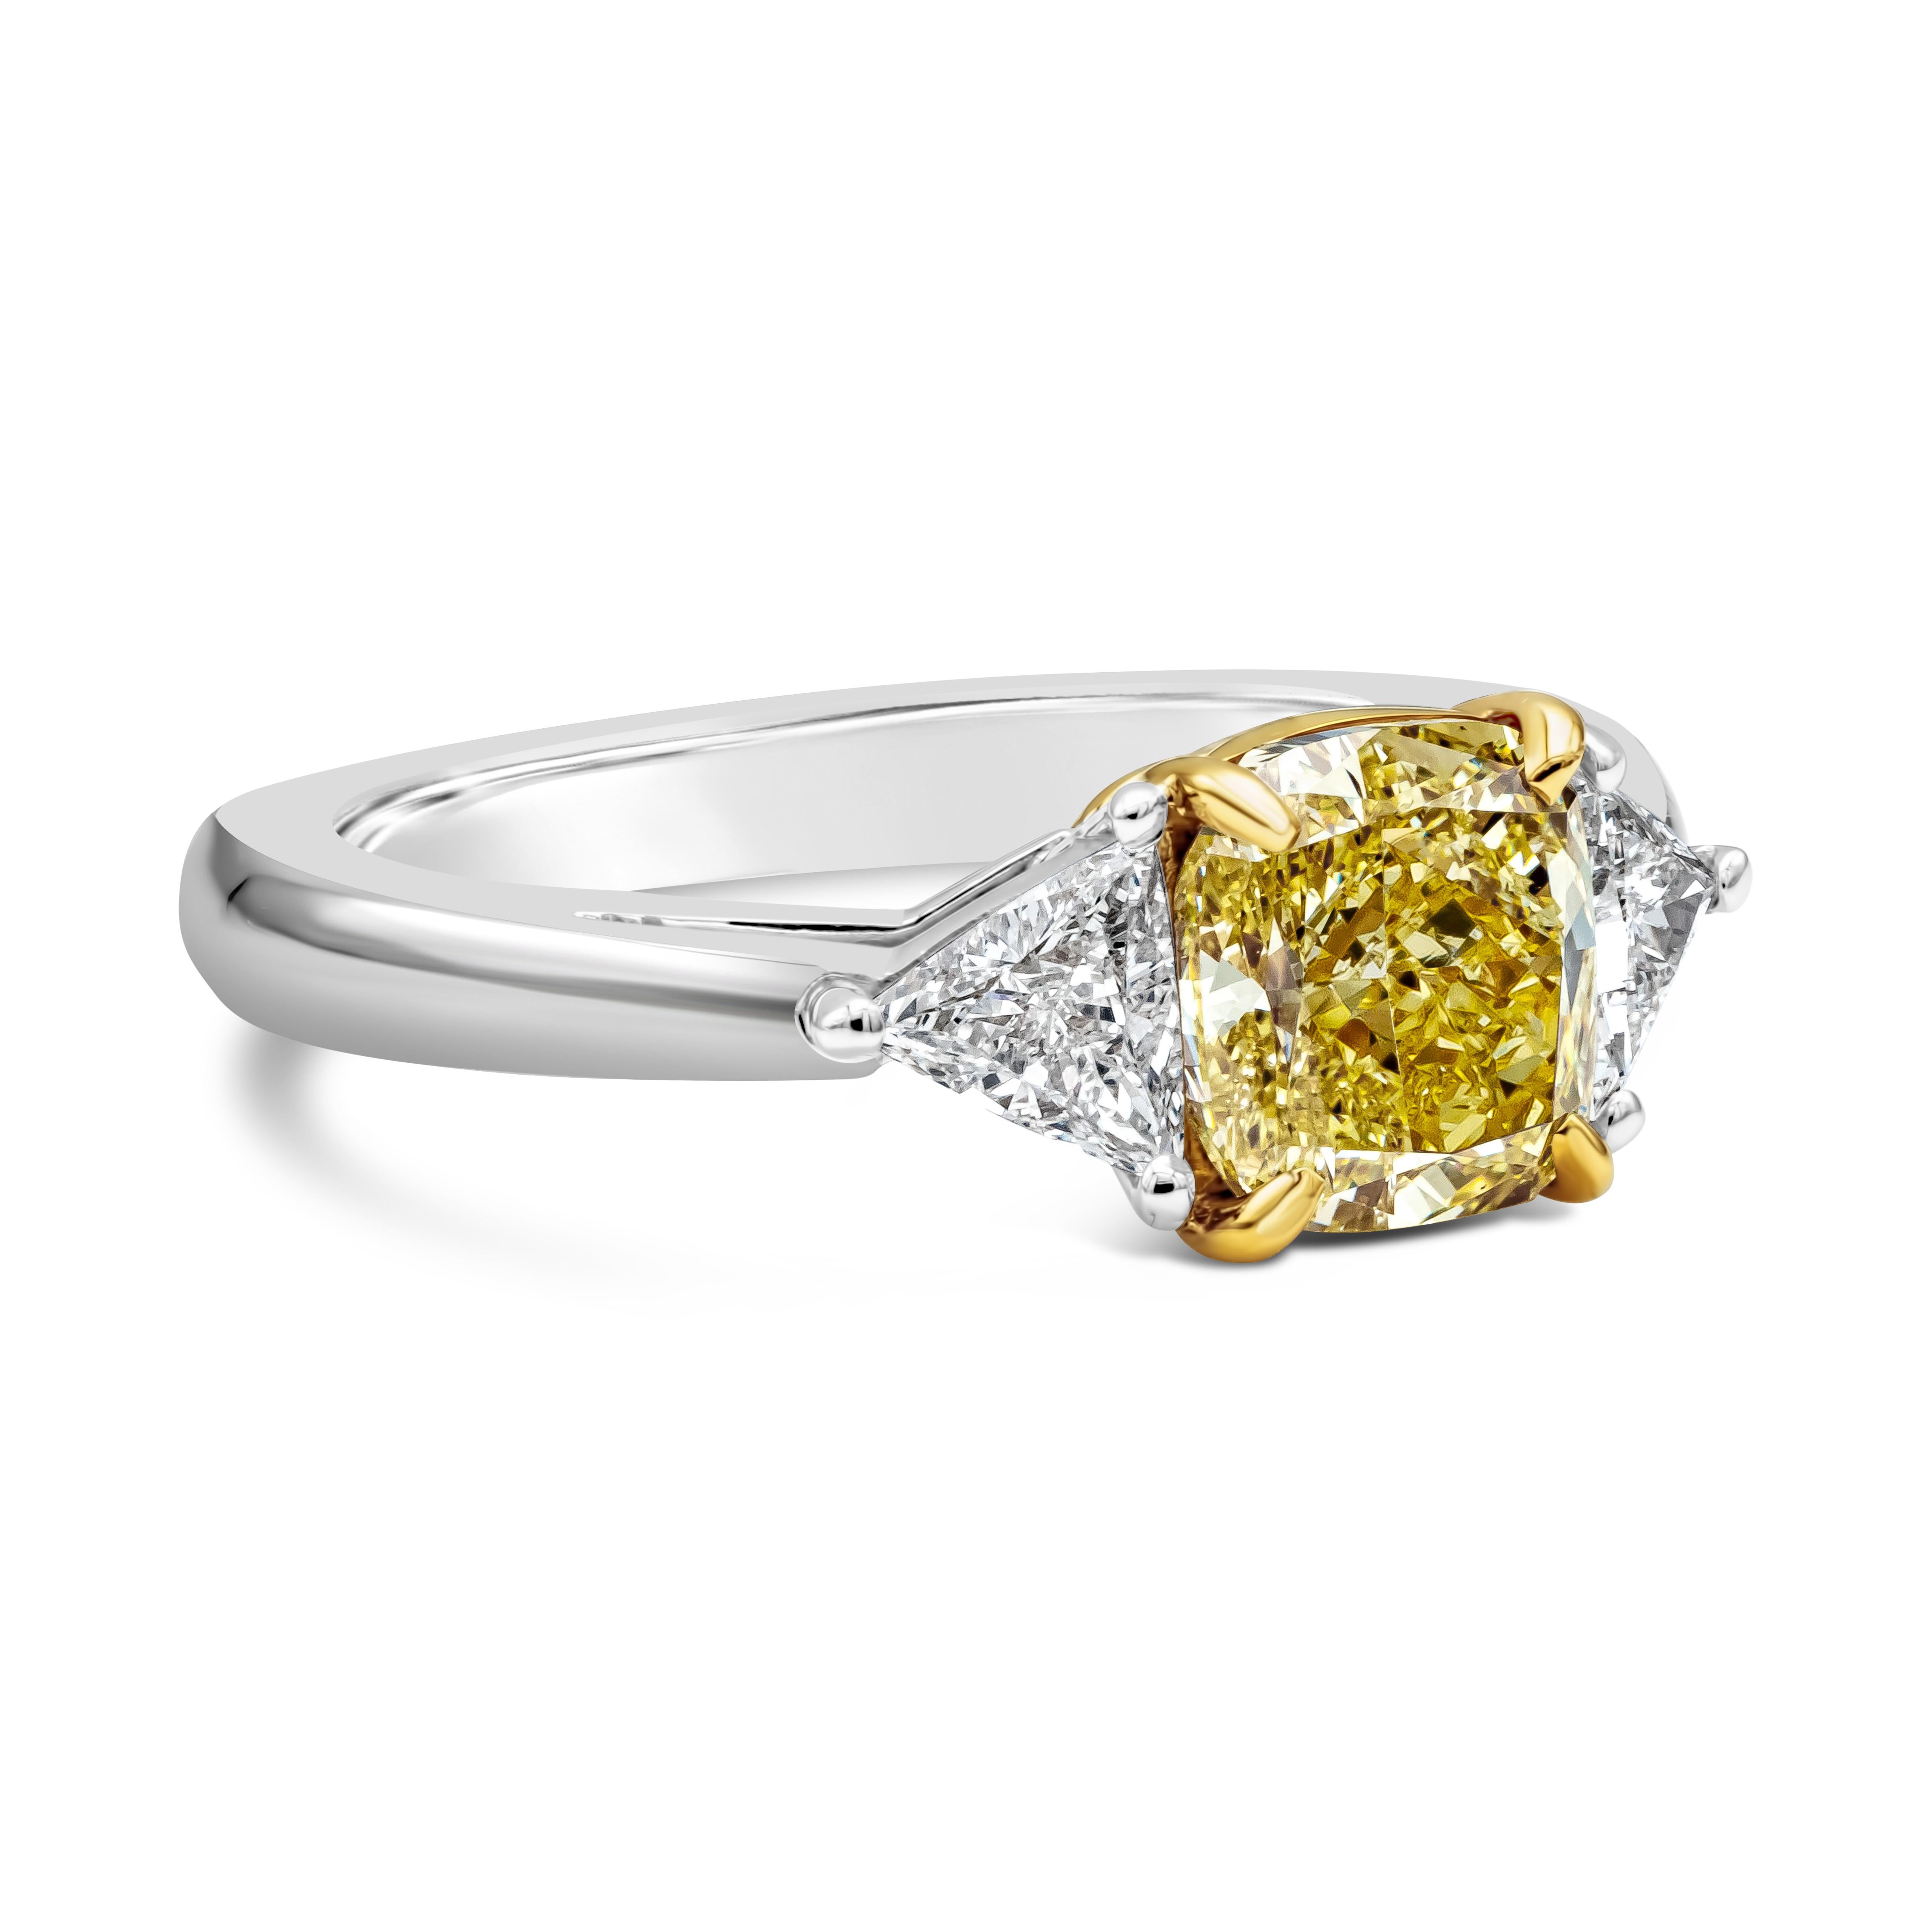 this three stone ring features a 1.65 carat cushion cut diamond center stone that GIA certified as Fancy Intense Yellow Color and SI1 clarity. Trillion side stones flank the center stone and weighs 0.44 carats total. Made in platinum with 18k yellow